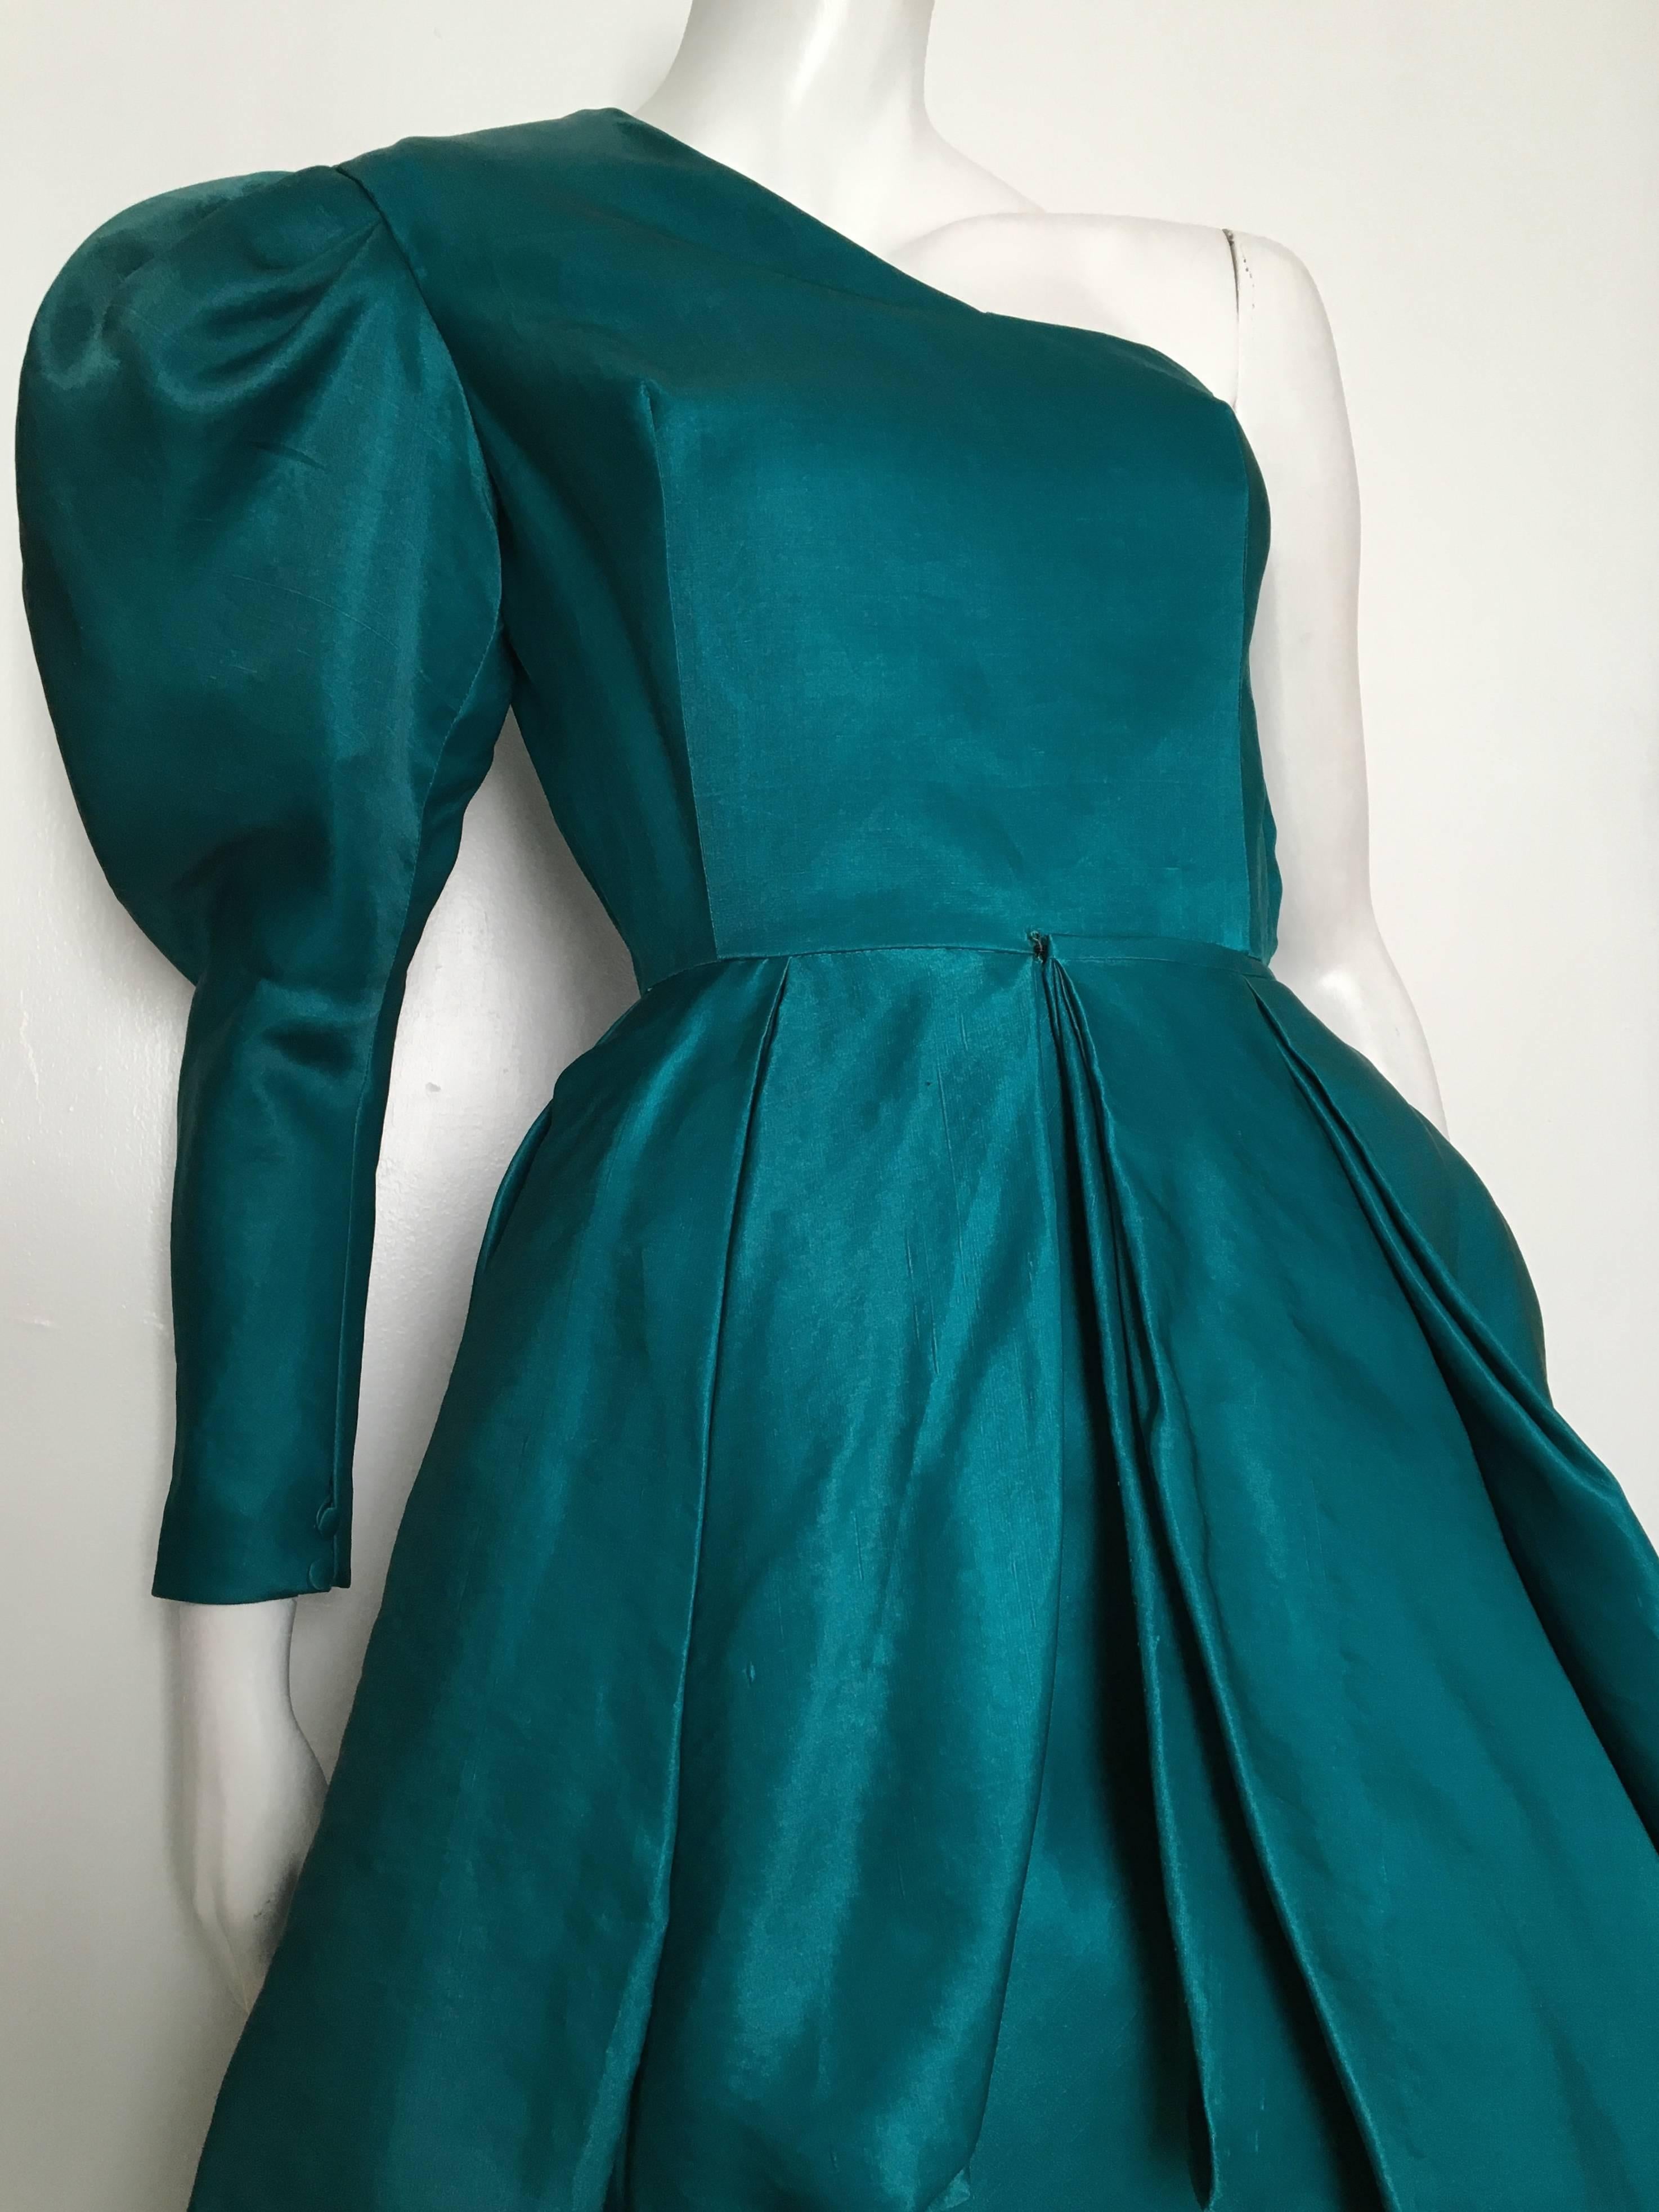 Tan Giudicelli 1980s teal silk dramatic one shoulder evening gown is a vintage French size 38 but fits like a modern USA size 4.  Please see the measurements listed below so you can properly measure your lovely body to make certain this gown will